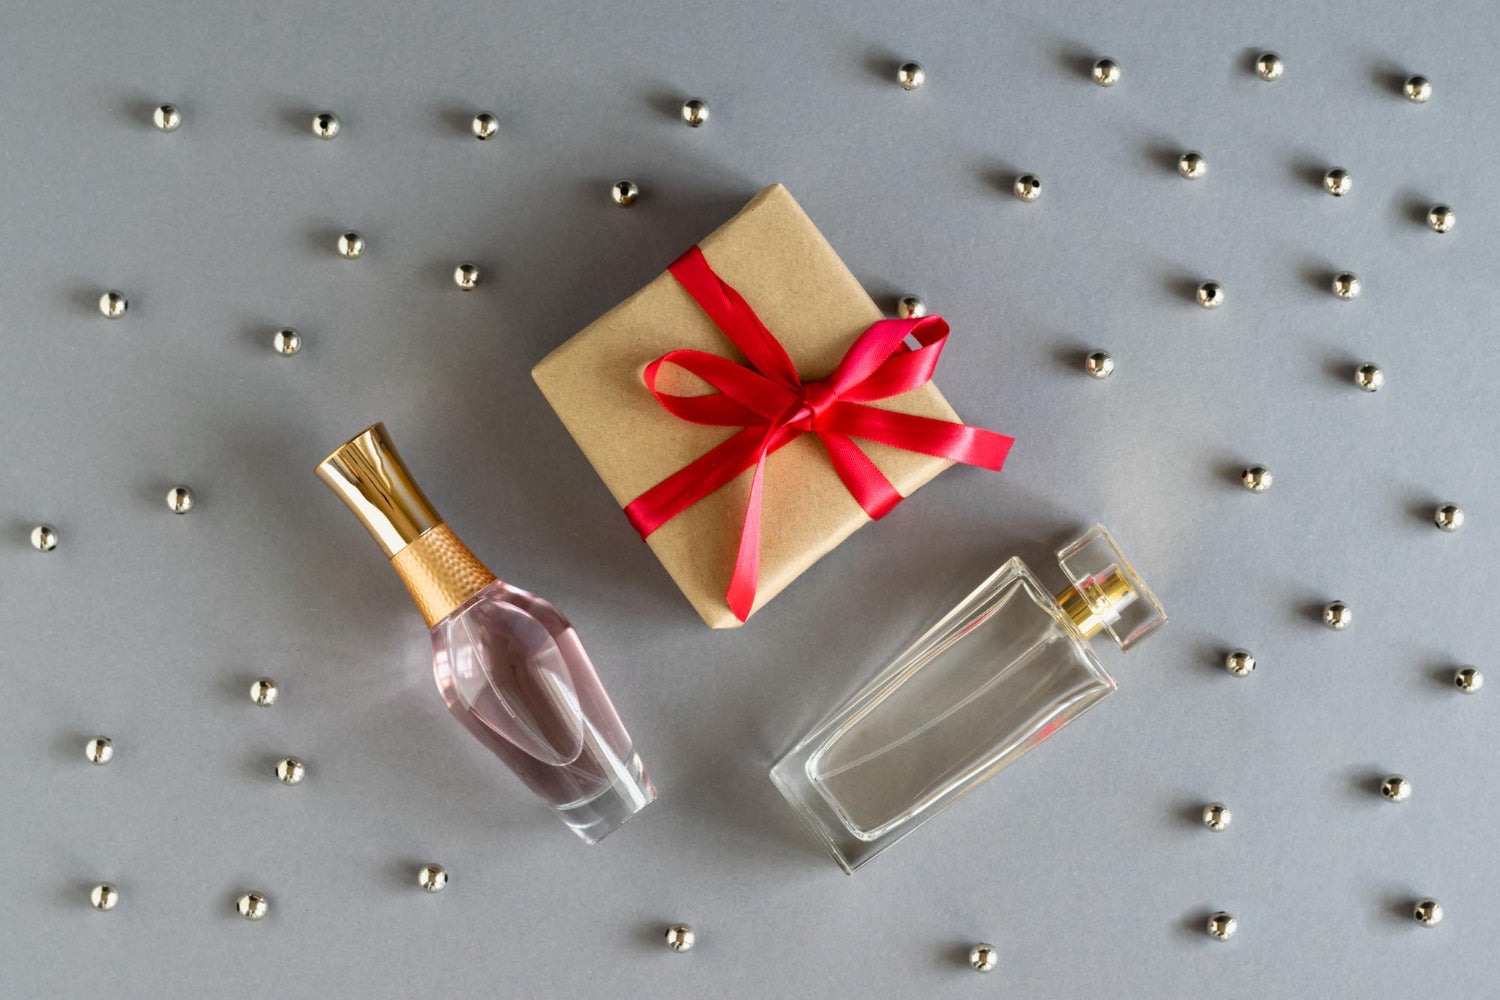 5 Perfumes Everyone Should Have in their Collection for the New Year